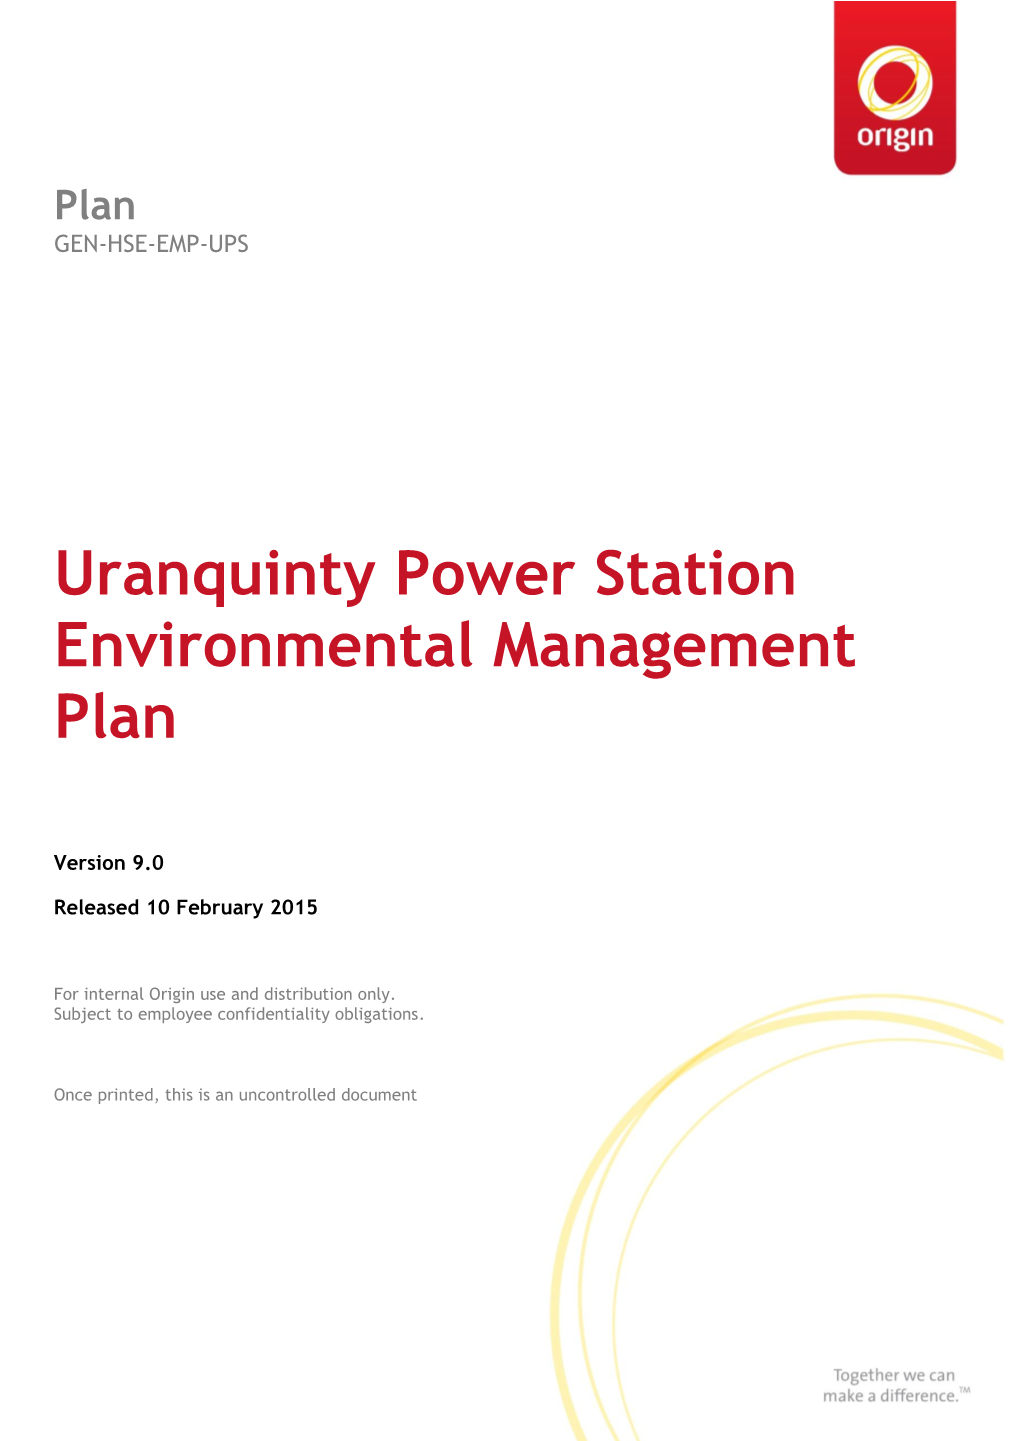 Uranquinty Power Station Environmental Management Plan, a Brief Hierarchy of Documents Is Set out Below